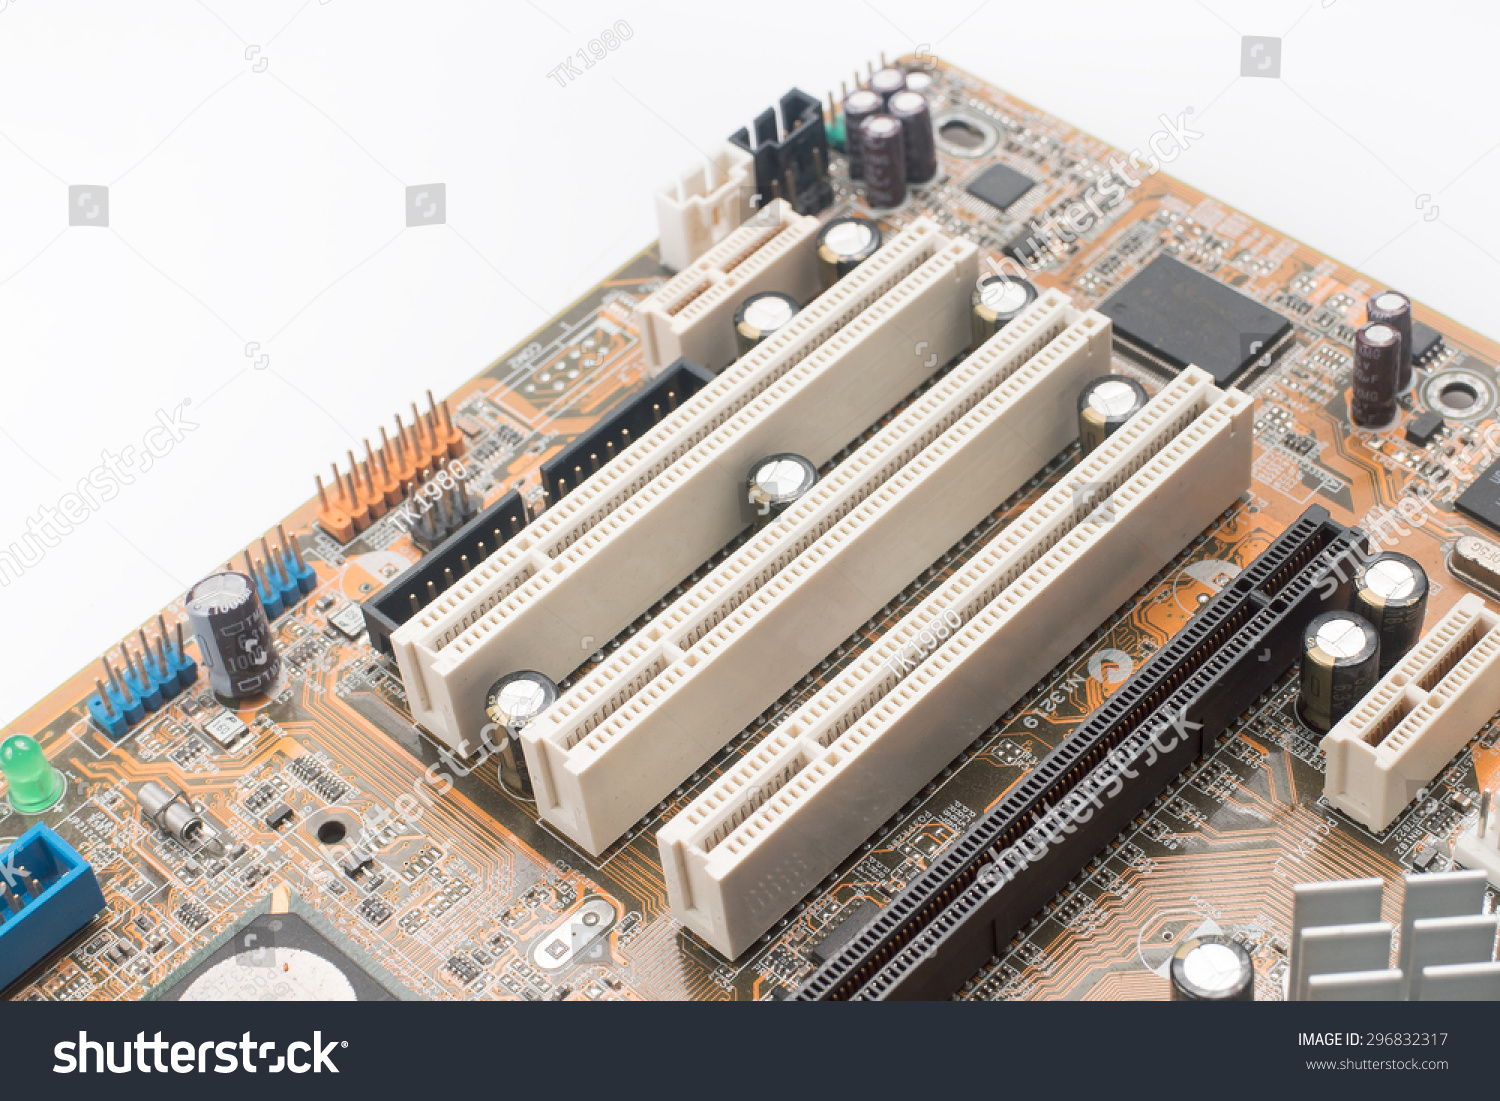 Pci Connector Slot In Motherboard Pc Stock Photo 296832317 Shutterstock